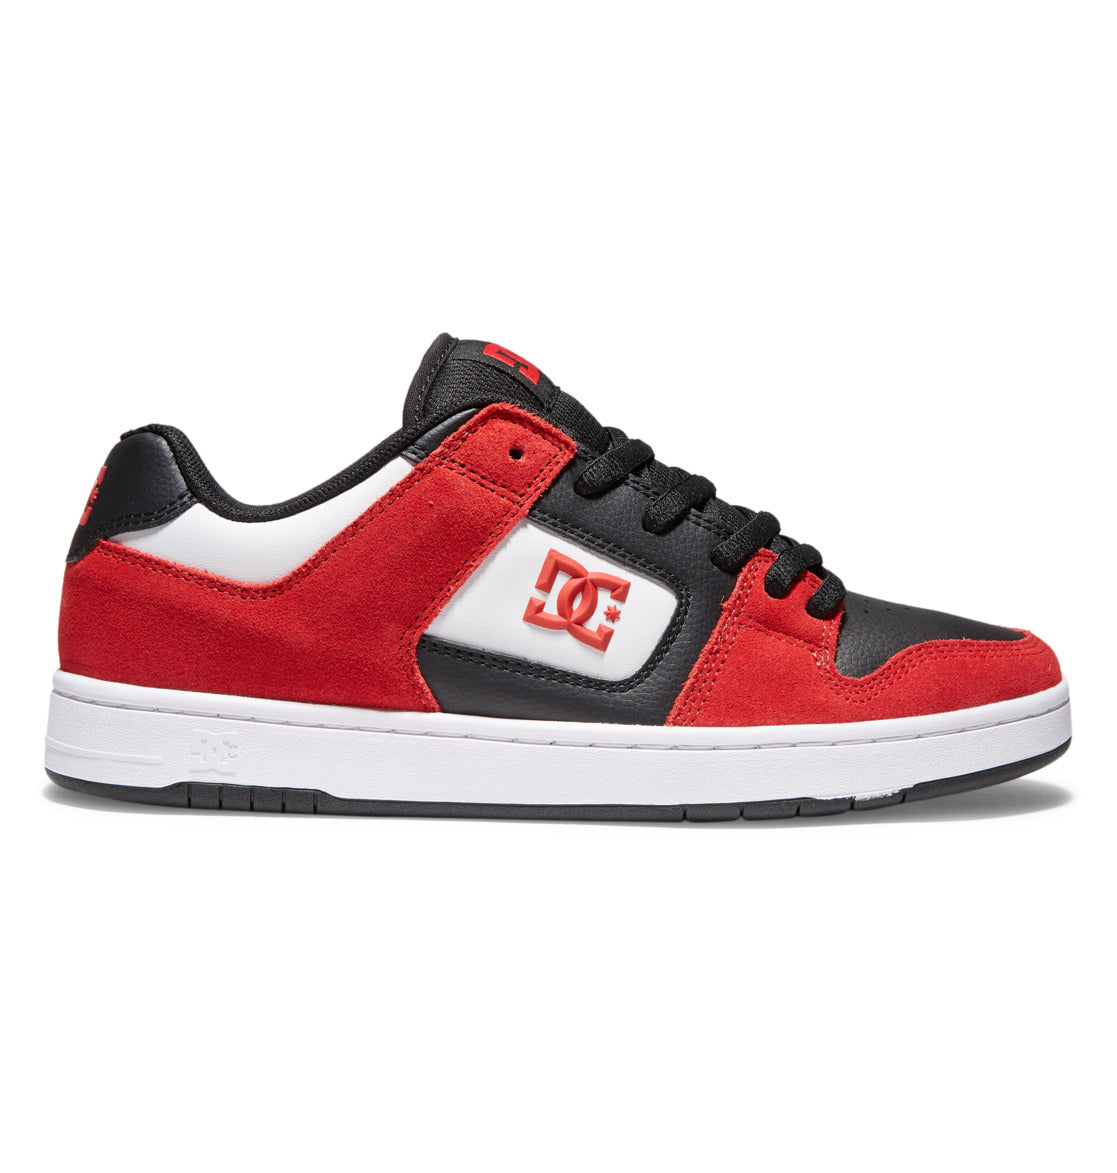 DC SHOES MANTECA 4 RED BLACK & WHITE TRAINERS